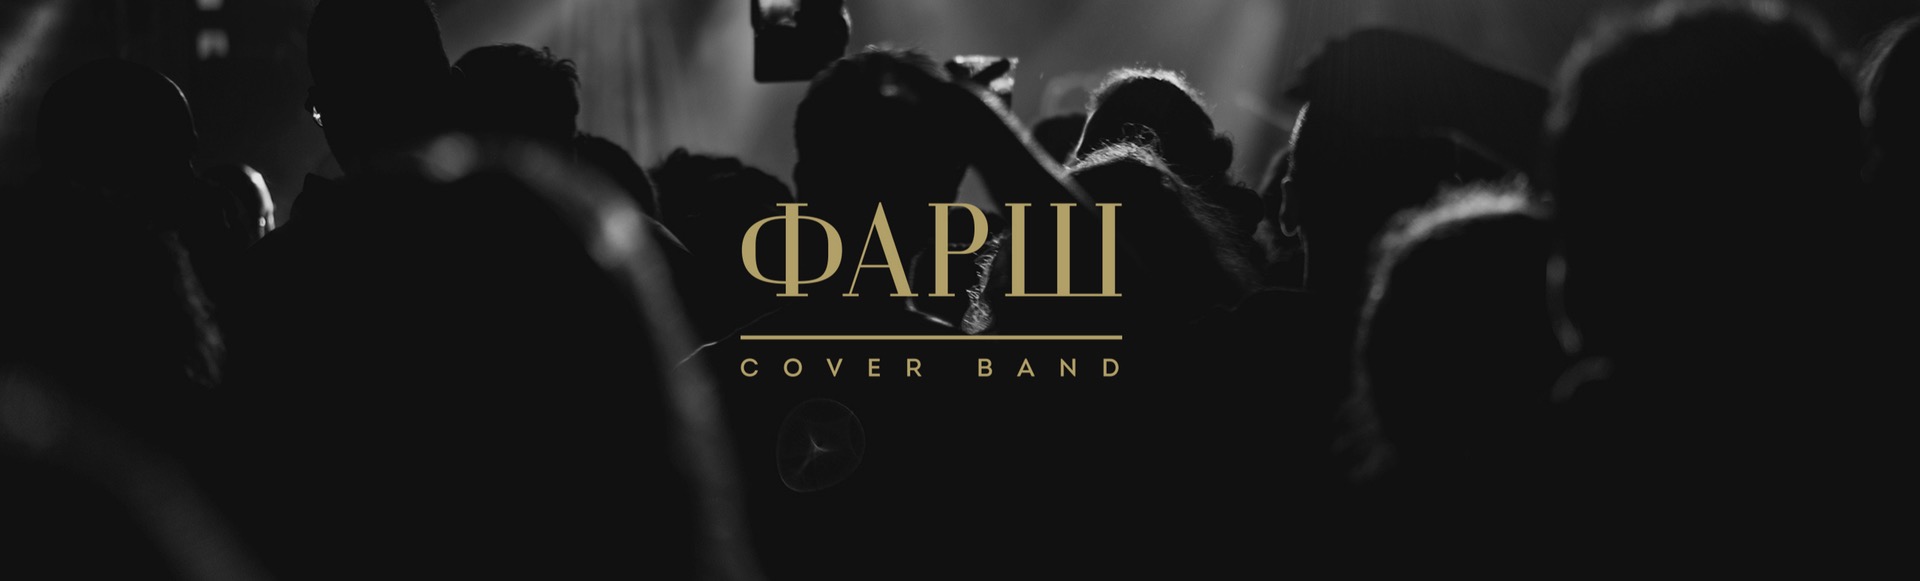 Фарш Cover Band